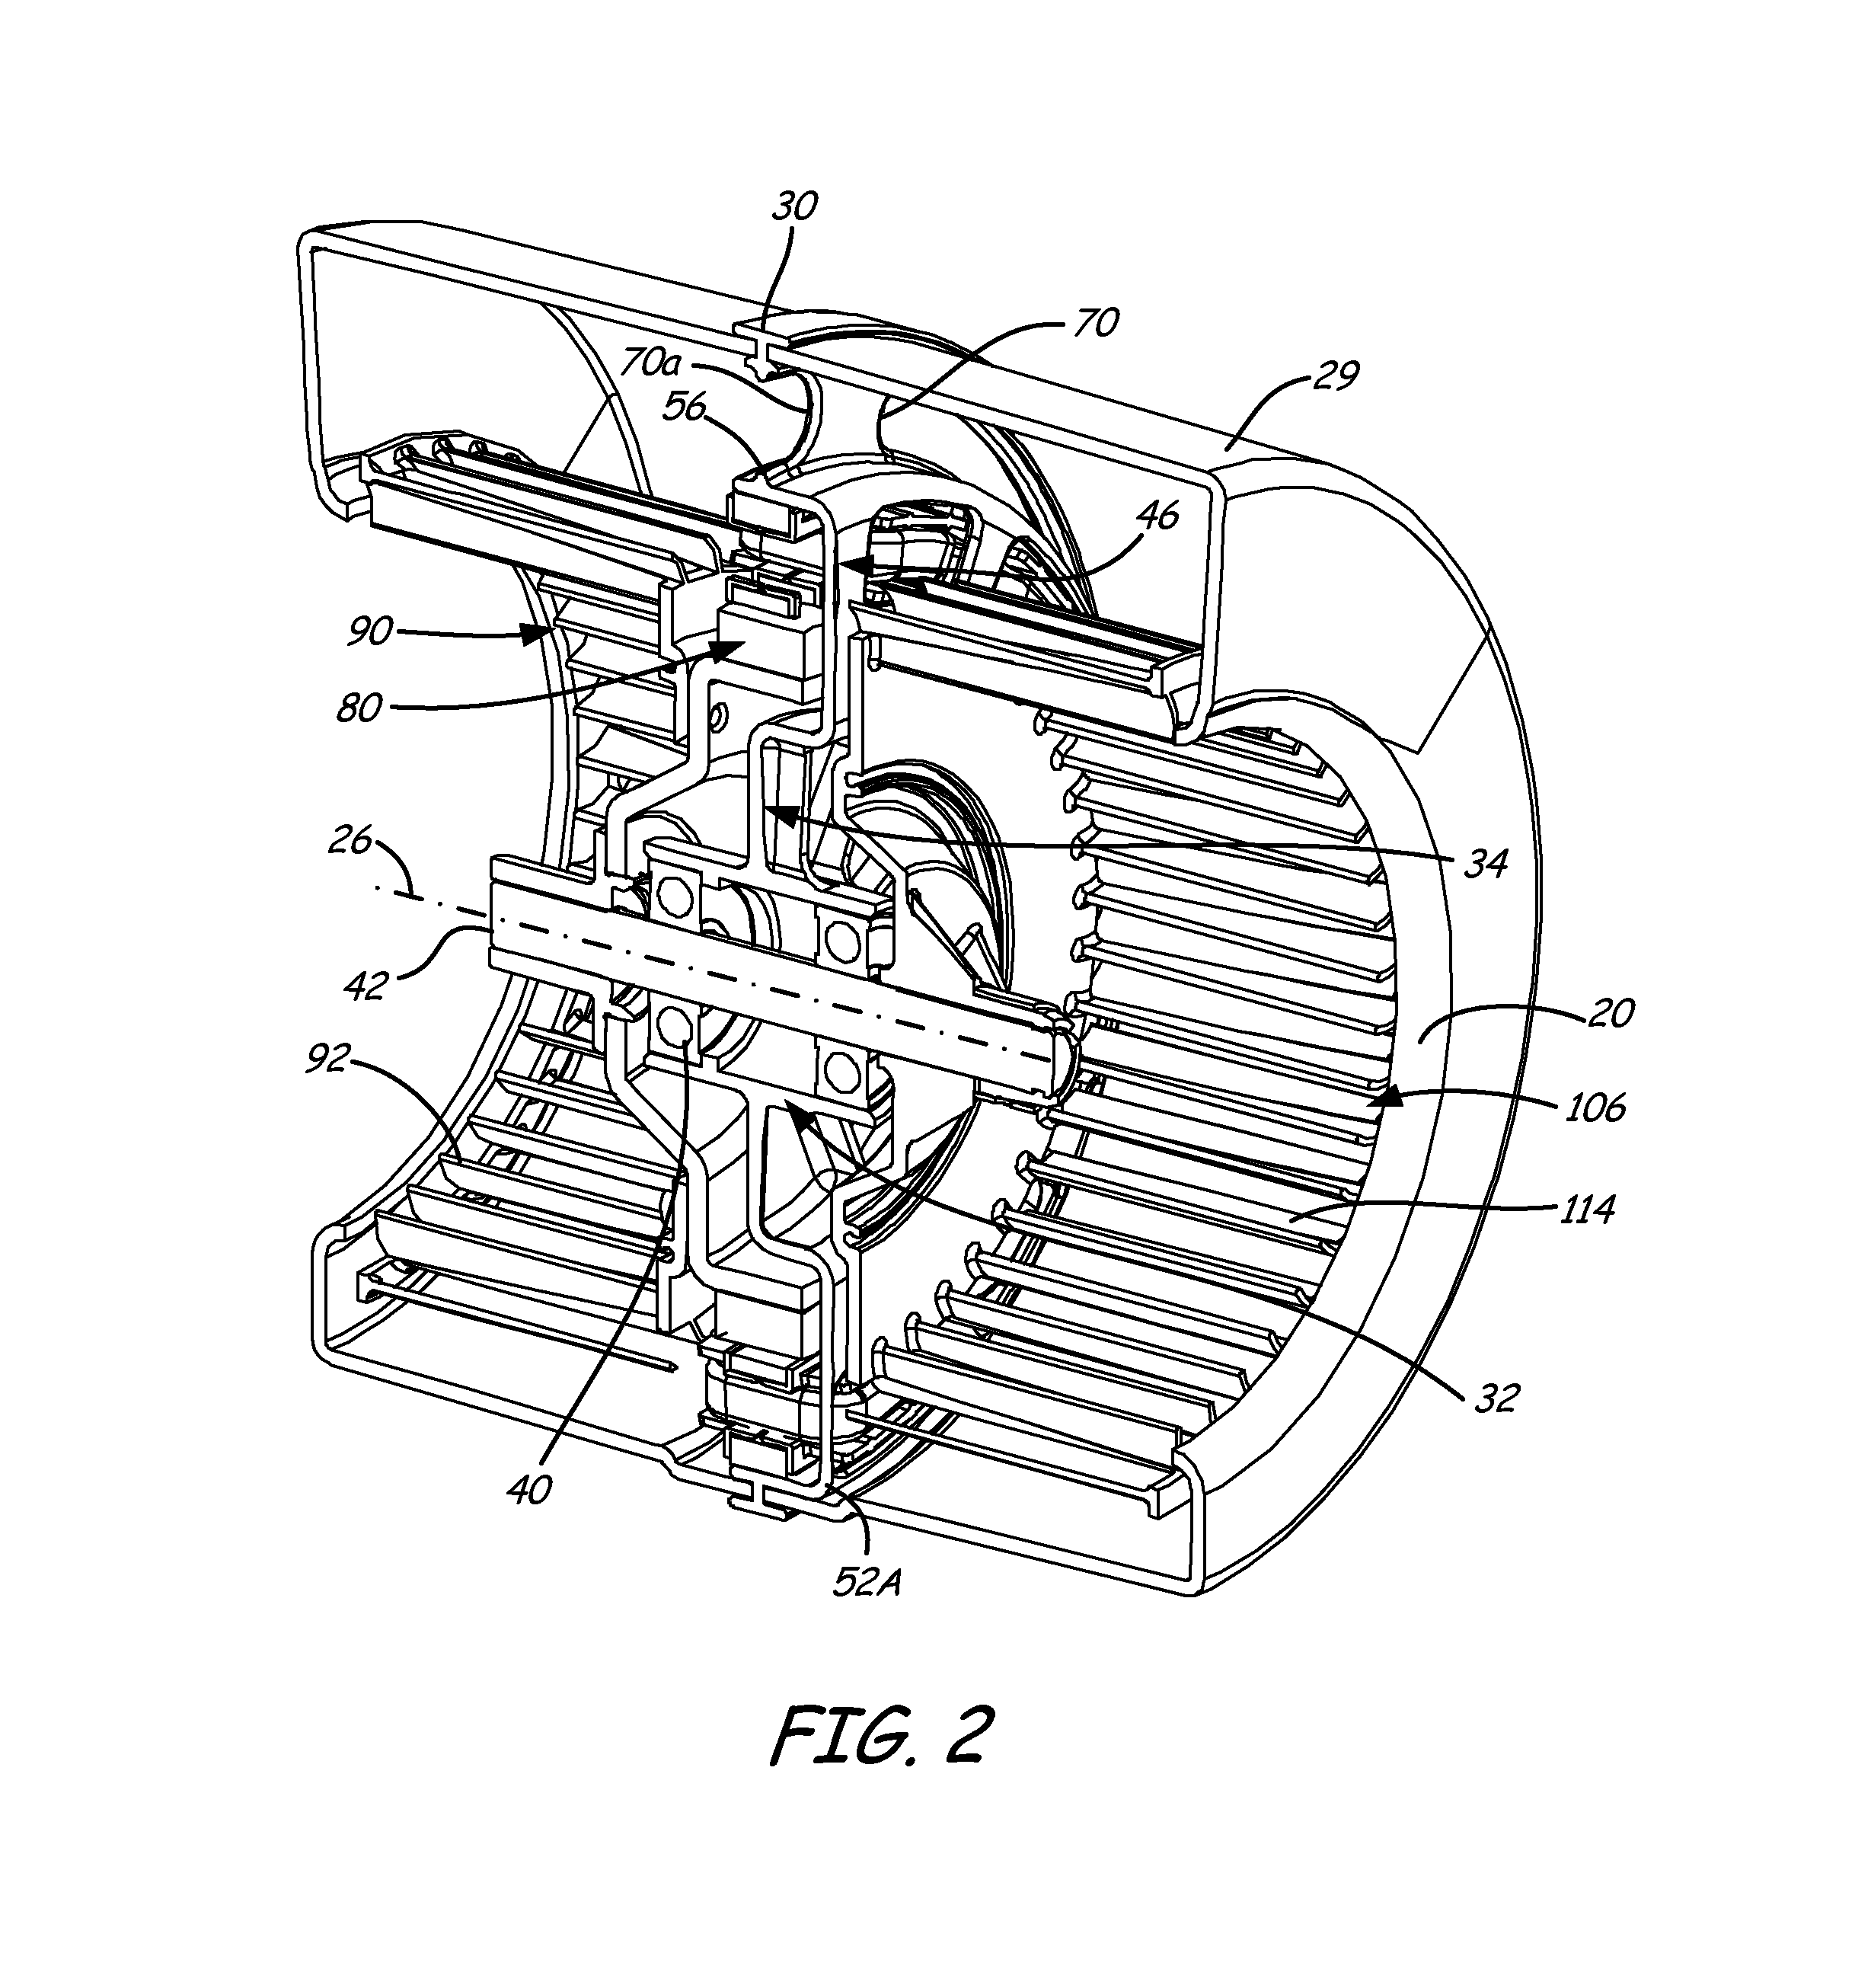 Double inlet centrifugal blower with peripheral motor